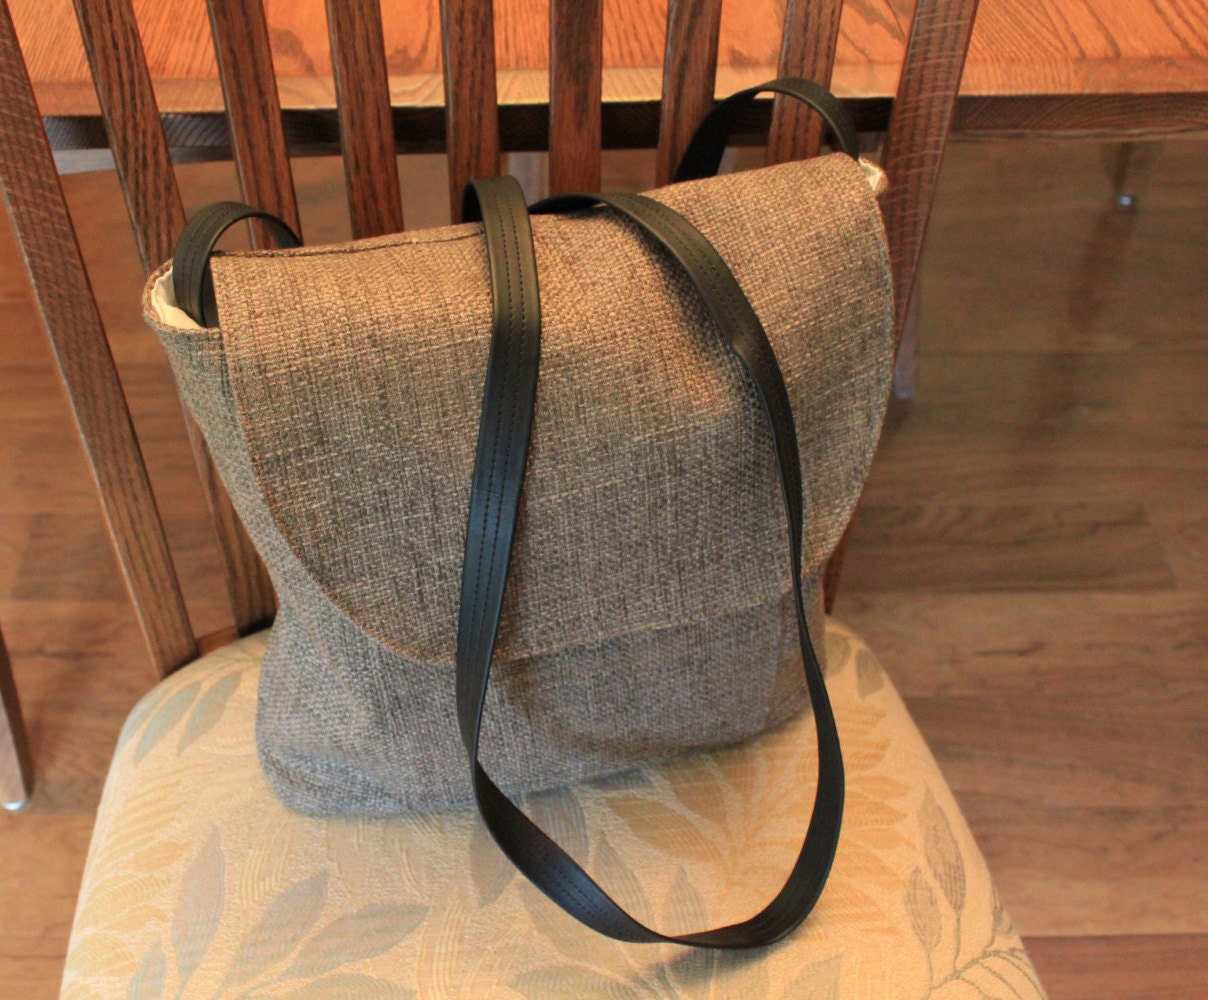 tote bag burlap fabricleather or webbing strap flap